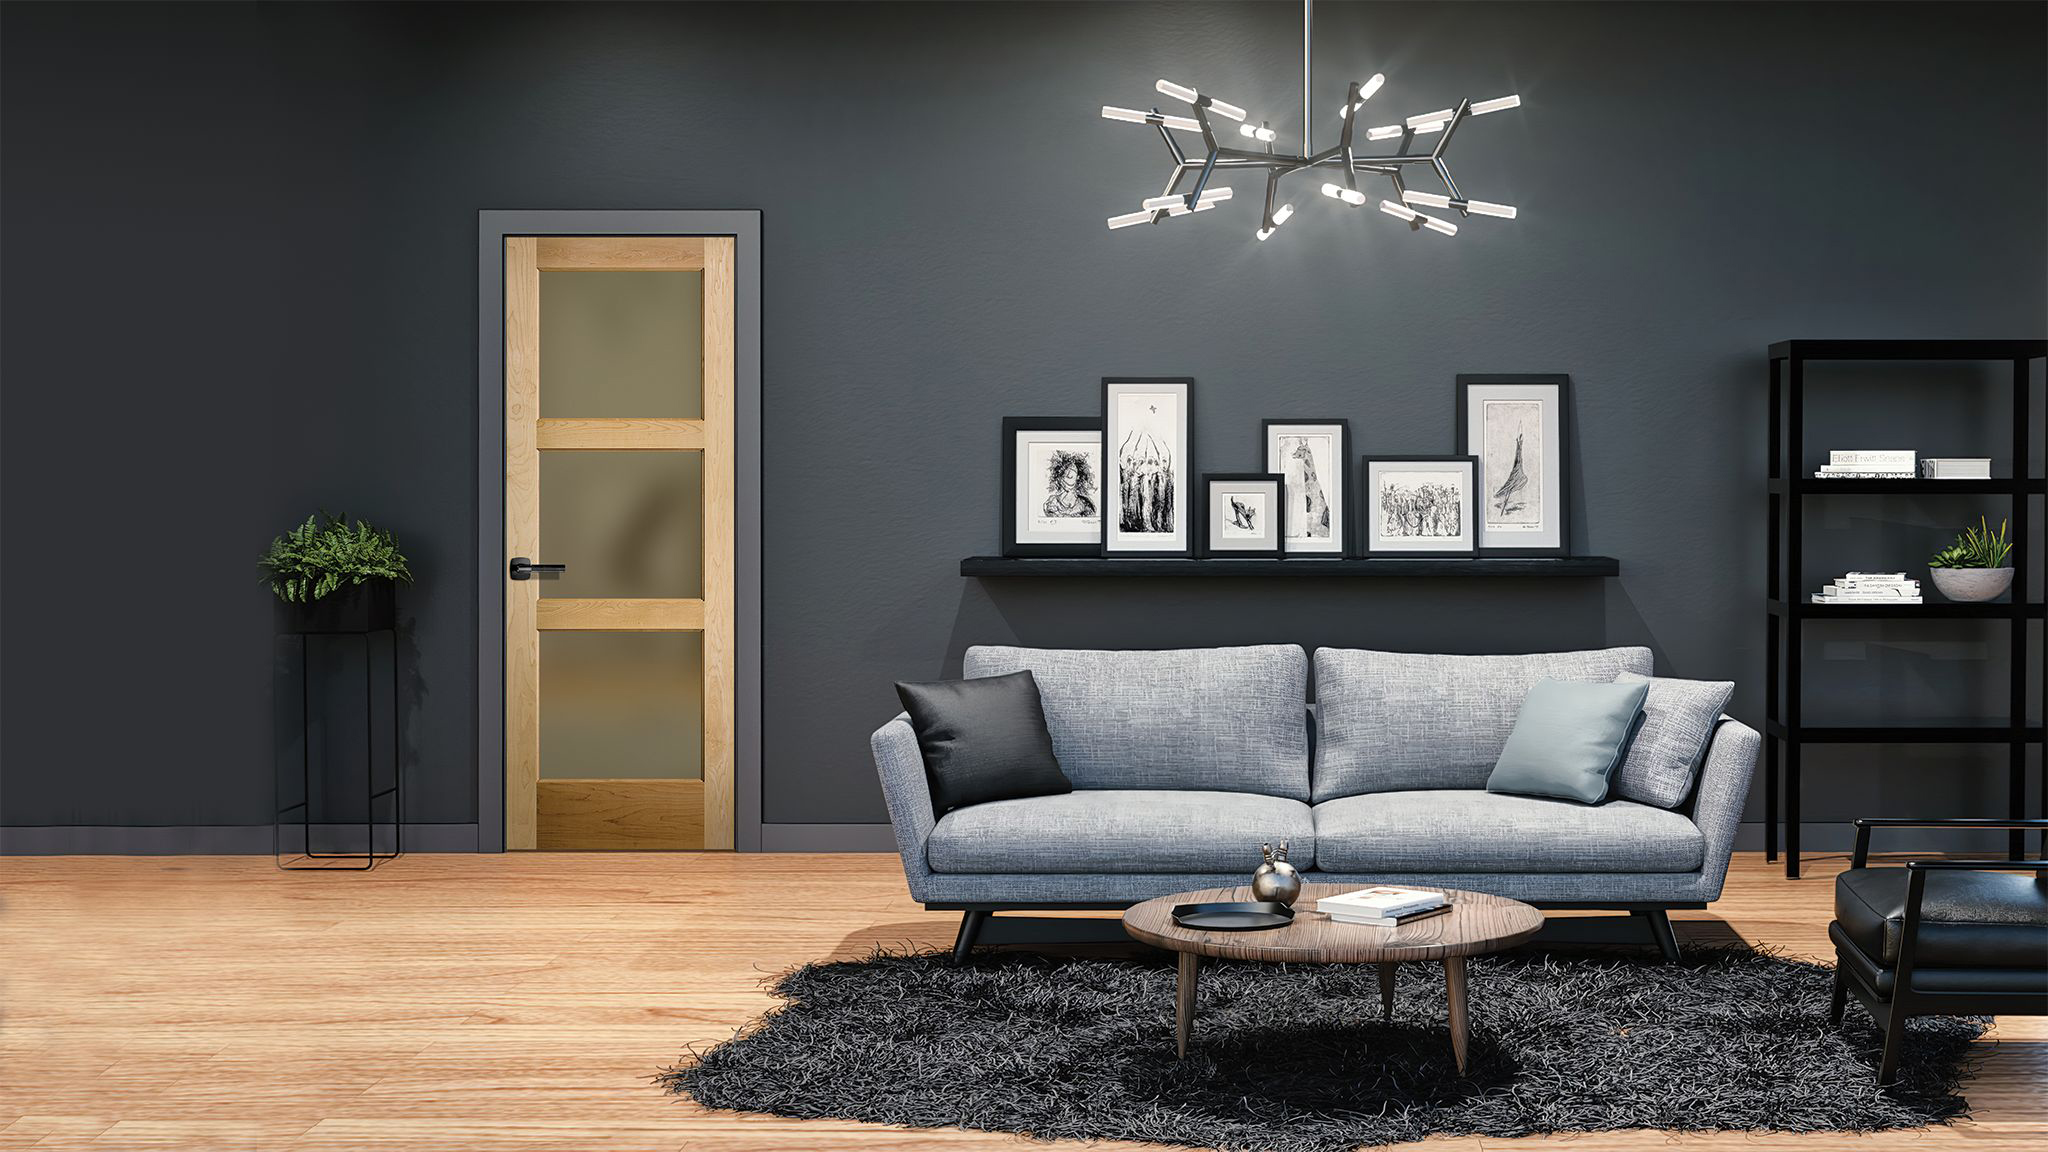 A transitional-style living room with black walls, gray furniture, an open shelve with black and white paintings, and a wood three equal lite door with a black frame